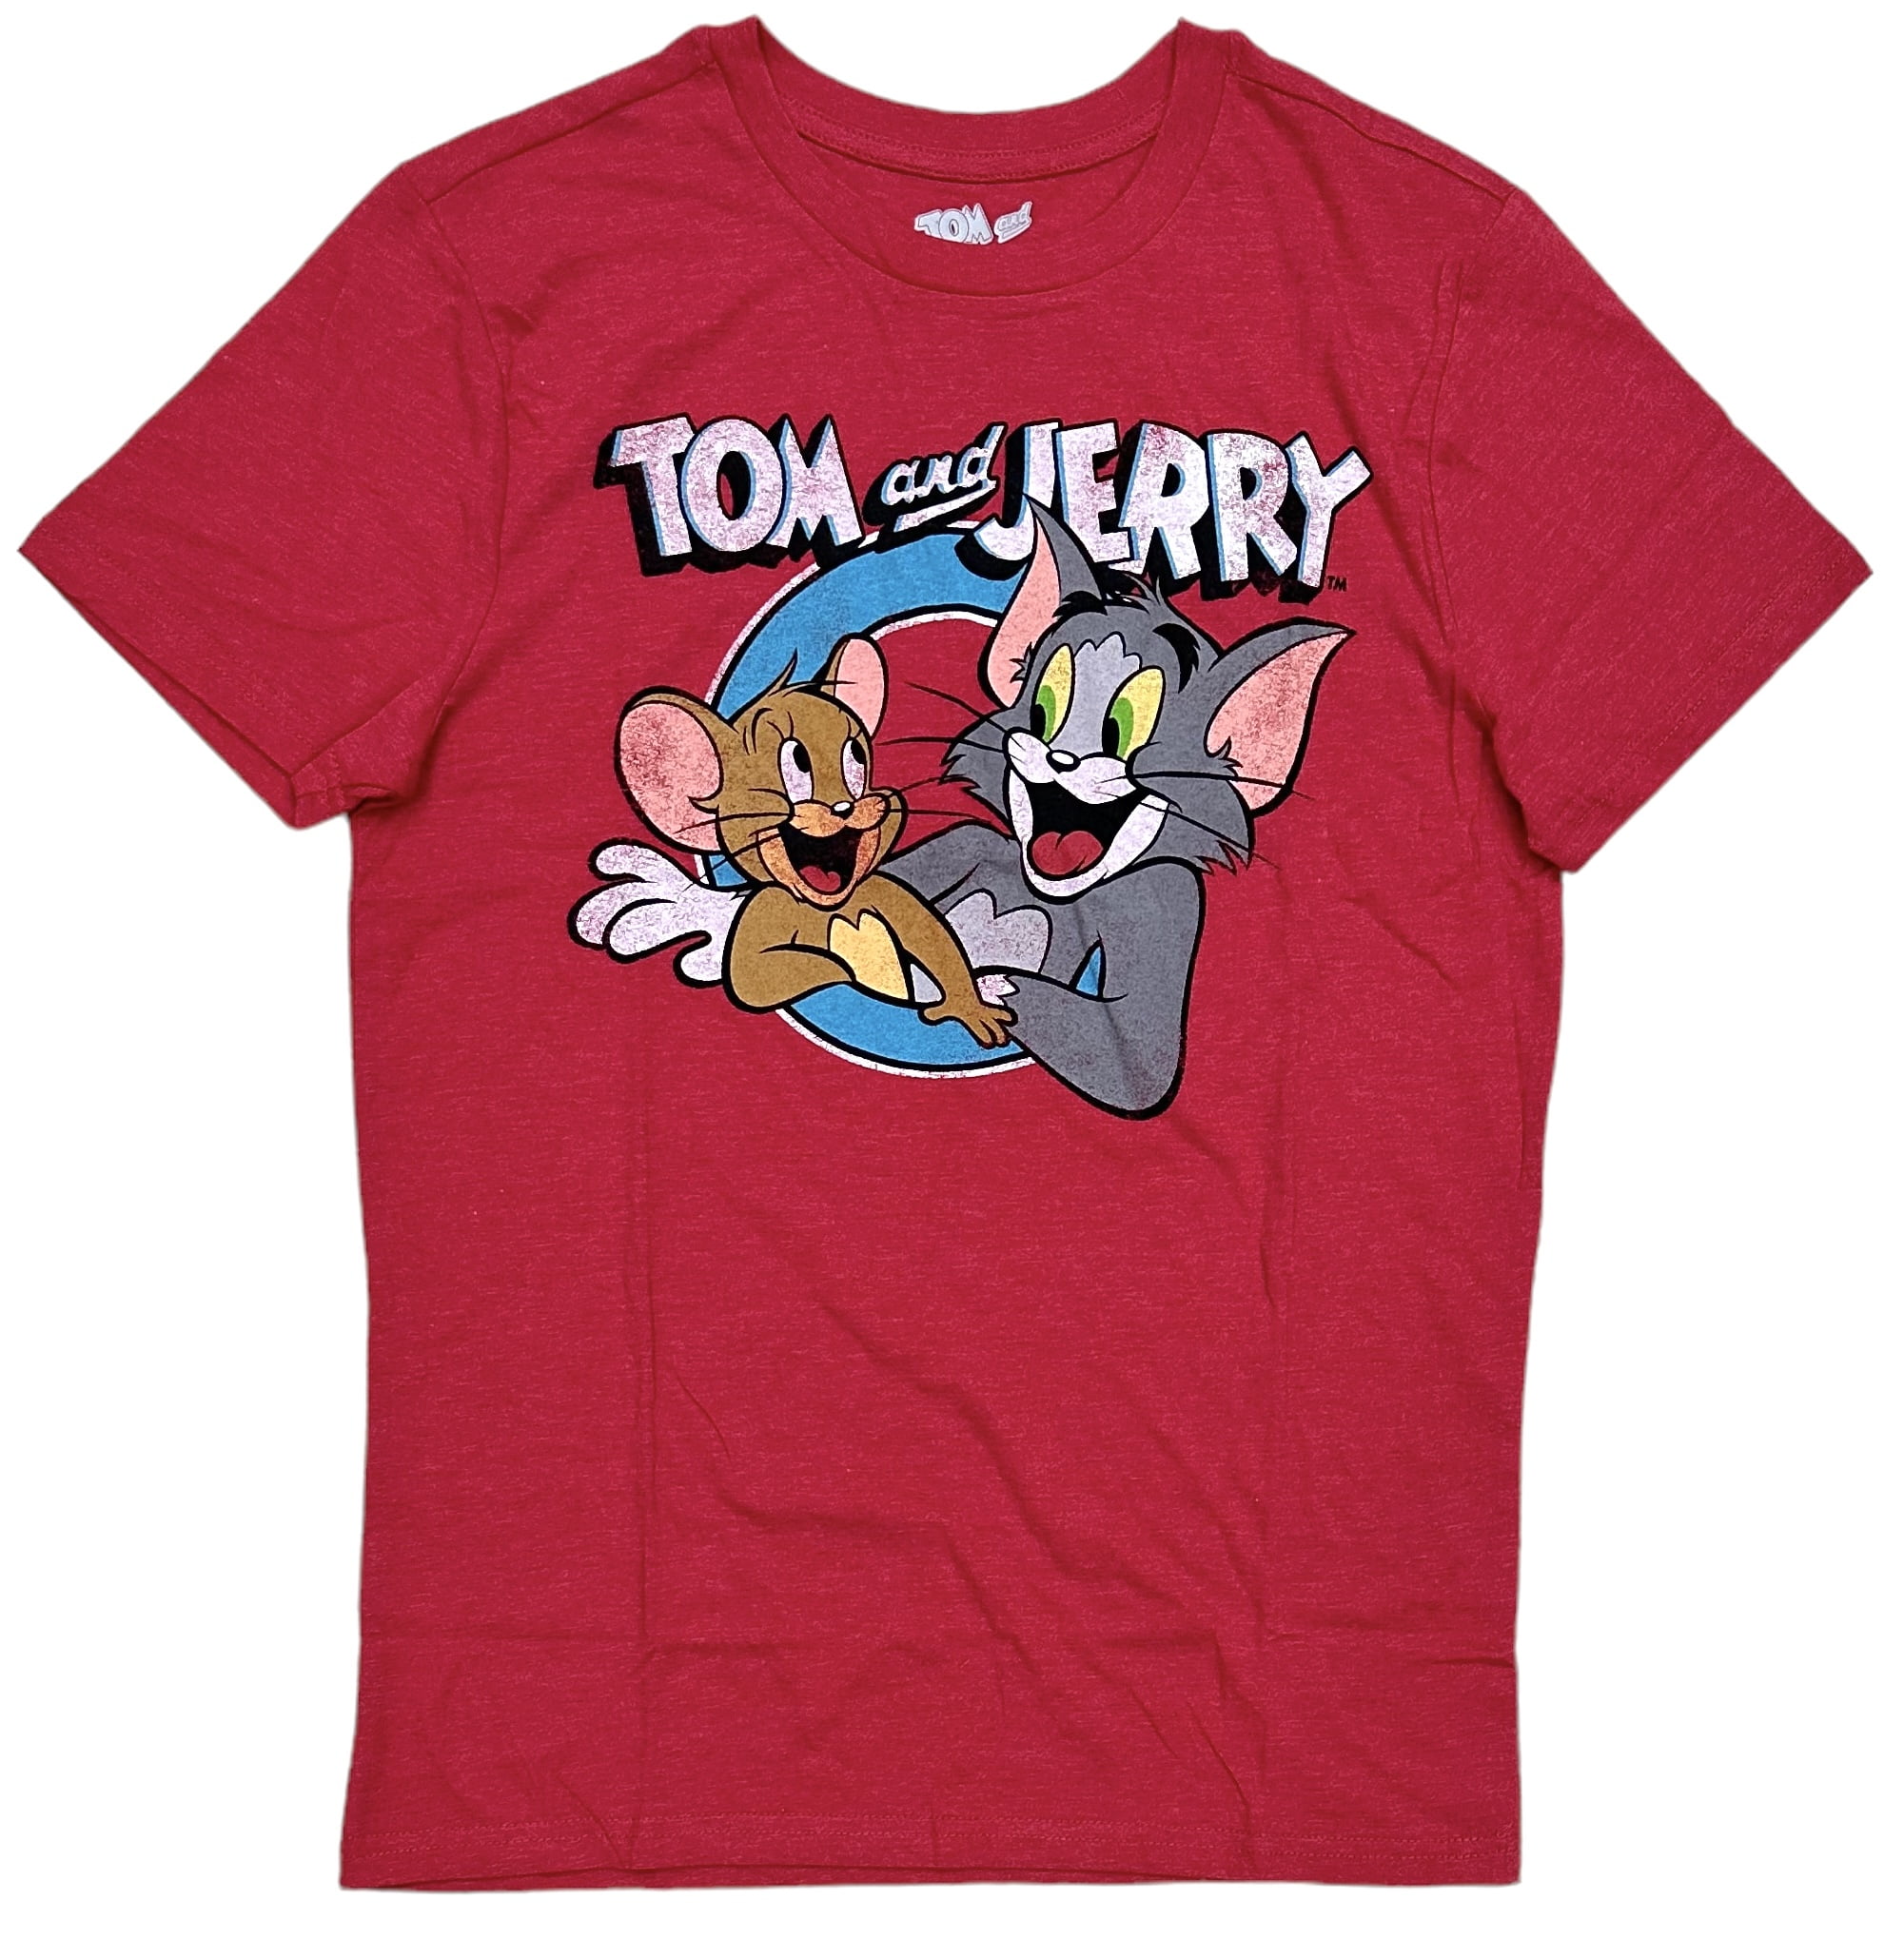 Tom and Jerry Men\'s Officially Licensed Distressed Graphic Print Tee T-Shirt  (XXX-Large, Red Heather)